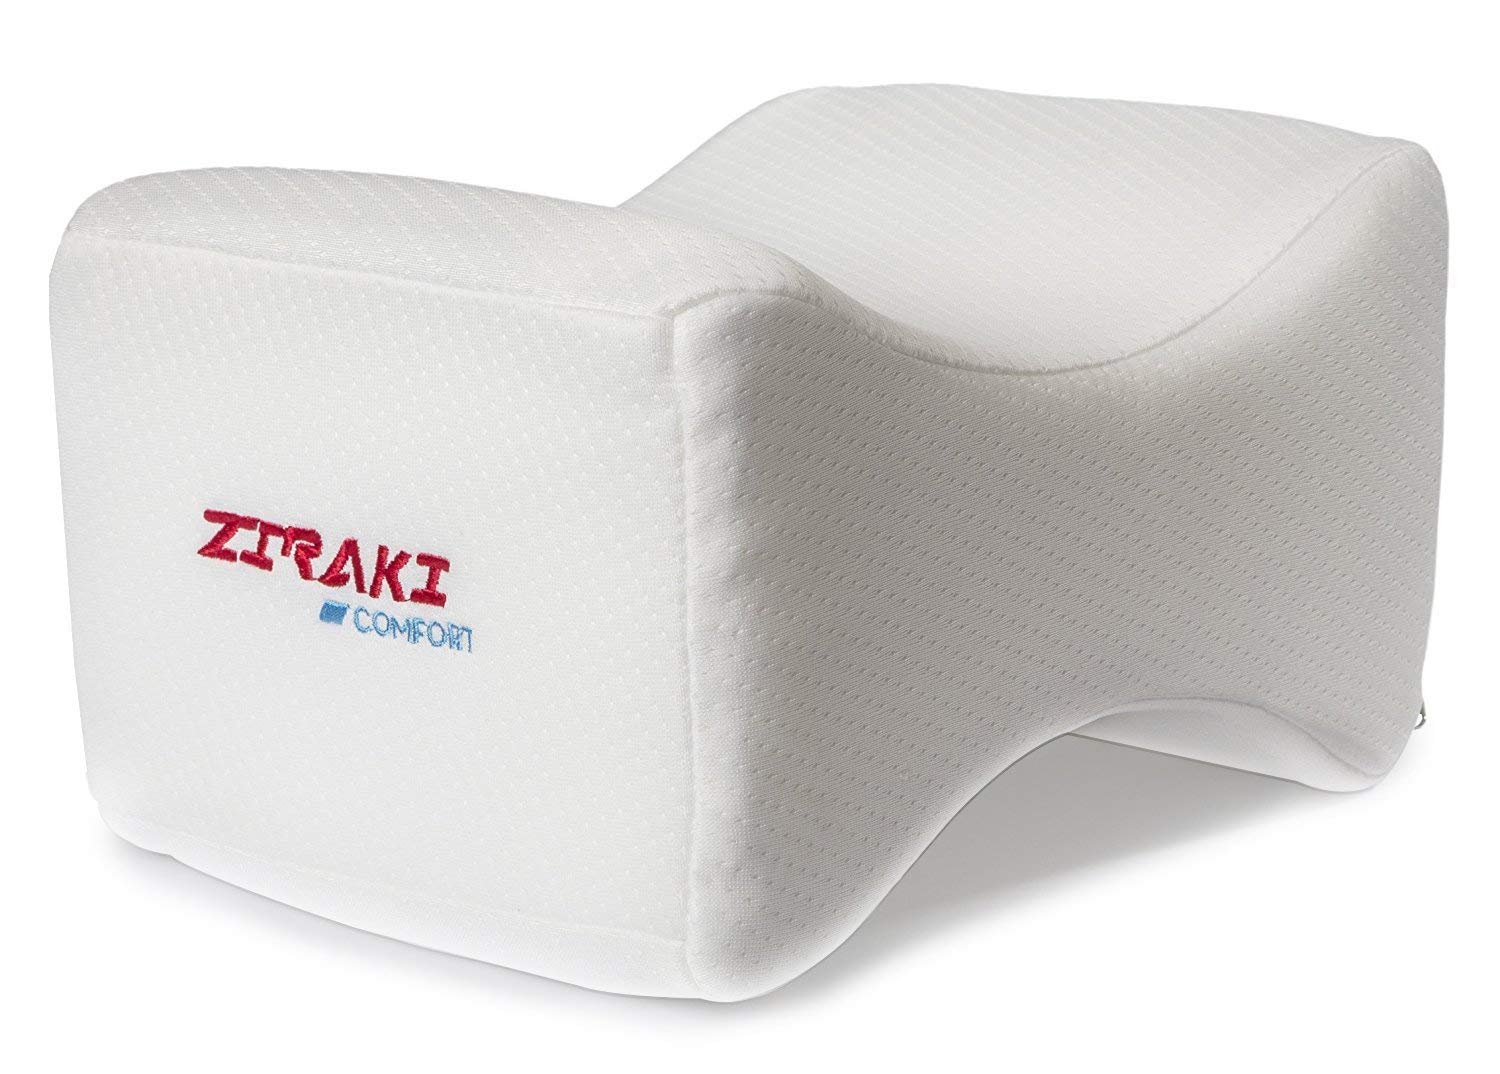 Ziraki memory foam wedge contour orthopedic knee pillow for sciatica nerve relief, back, leg, hip and joint pain, leg support, spine alignment, pregnancy